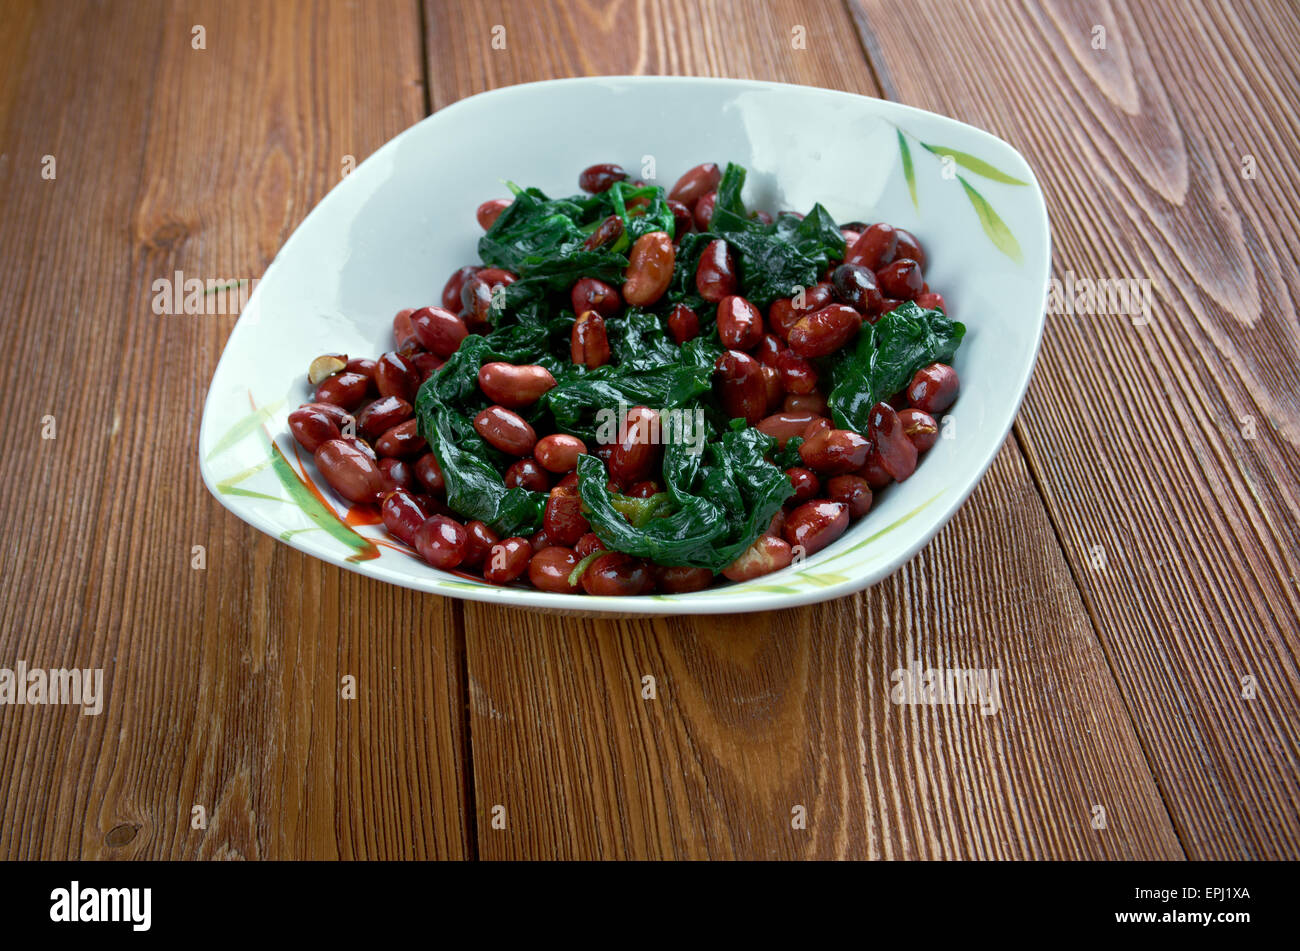 Spinach with Peanuts Stock Photo